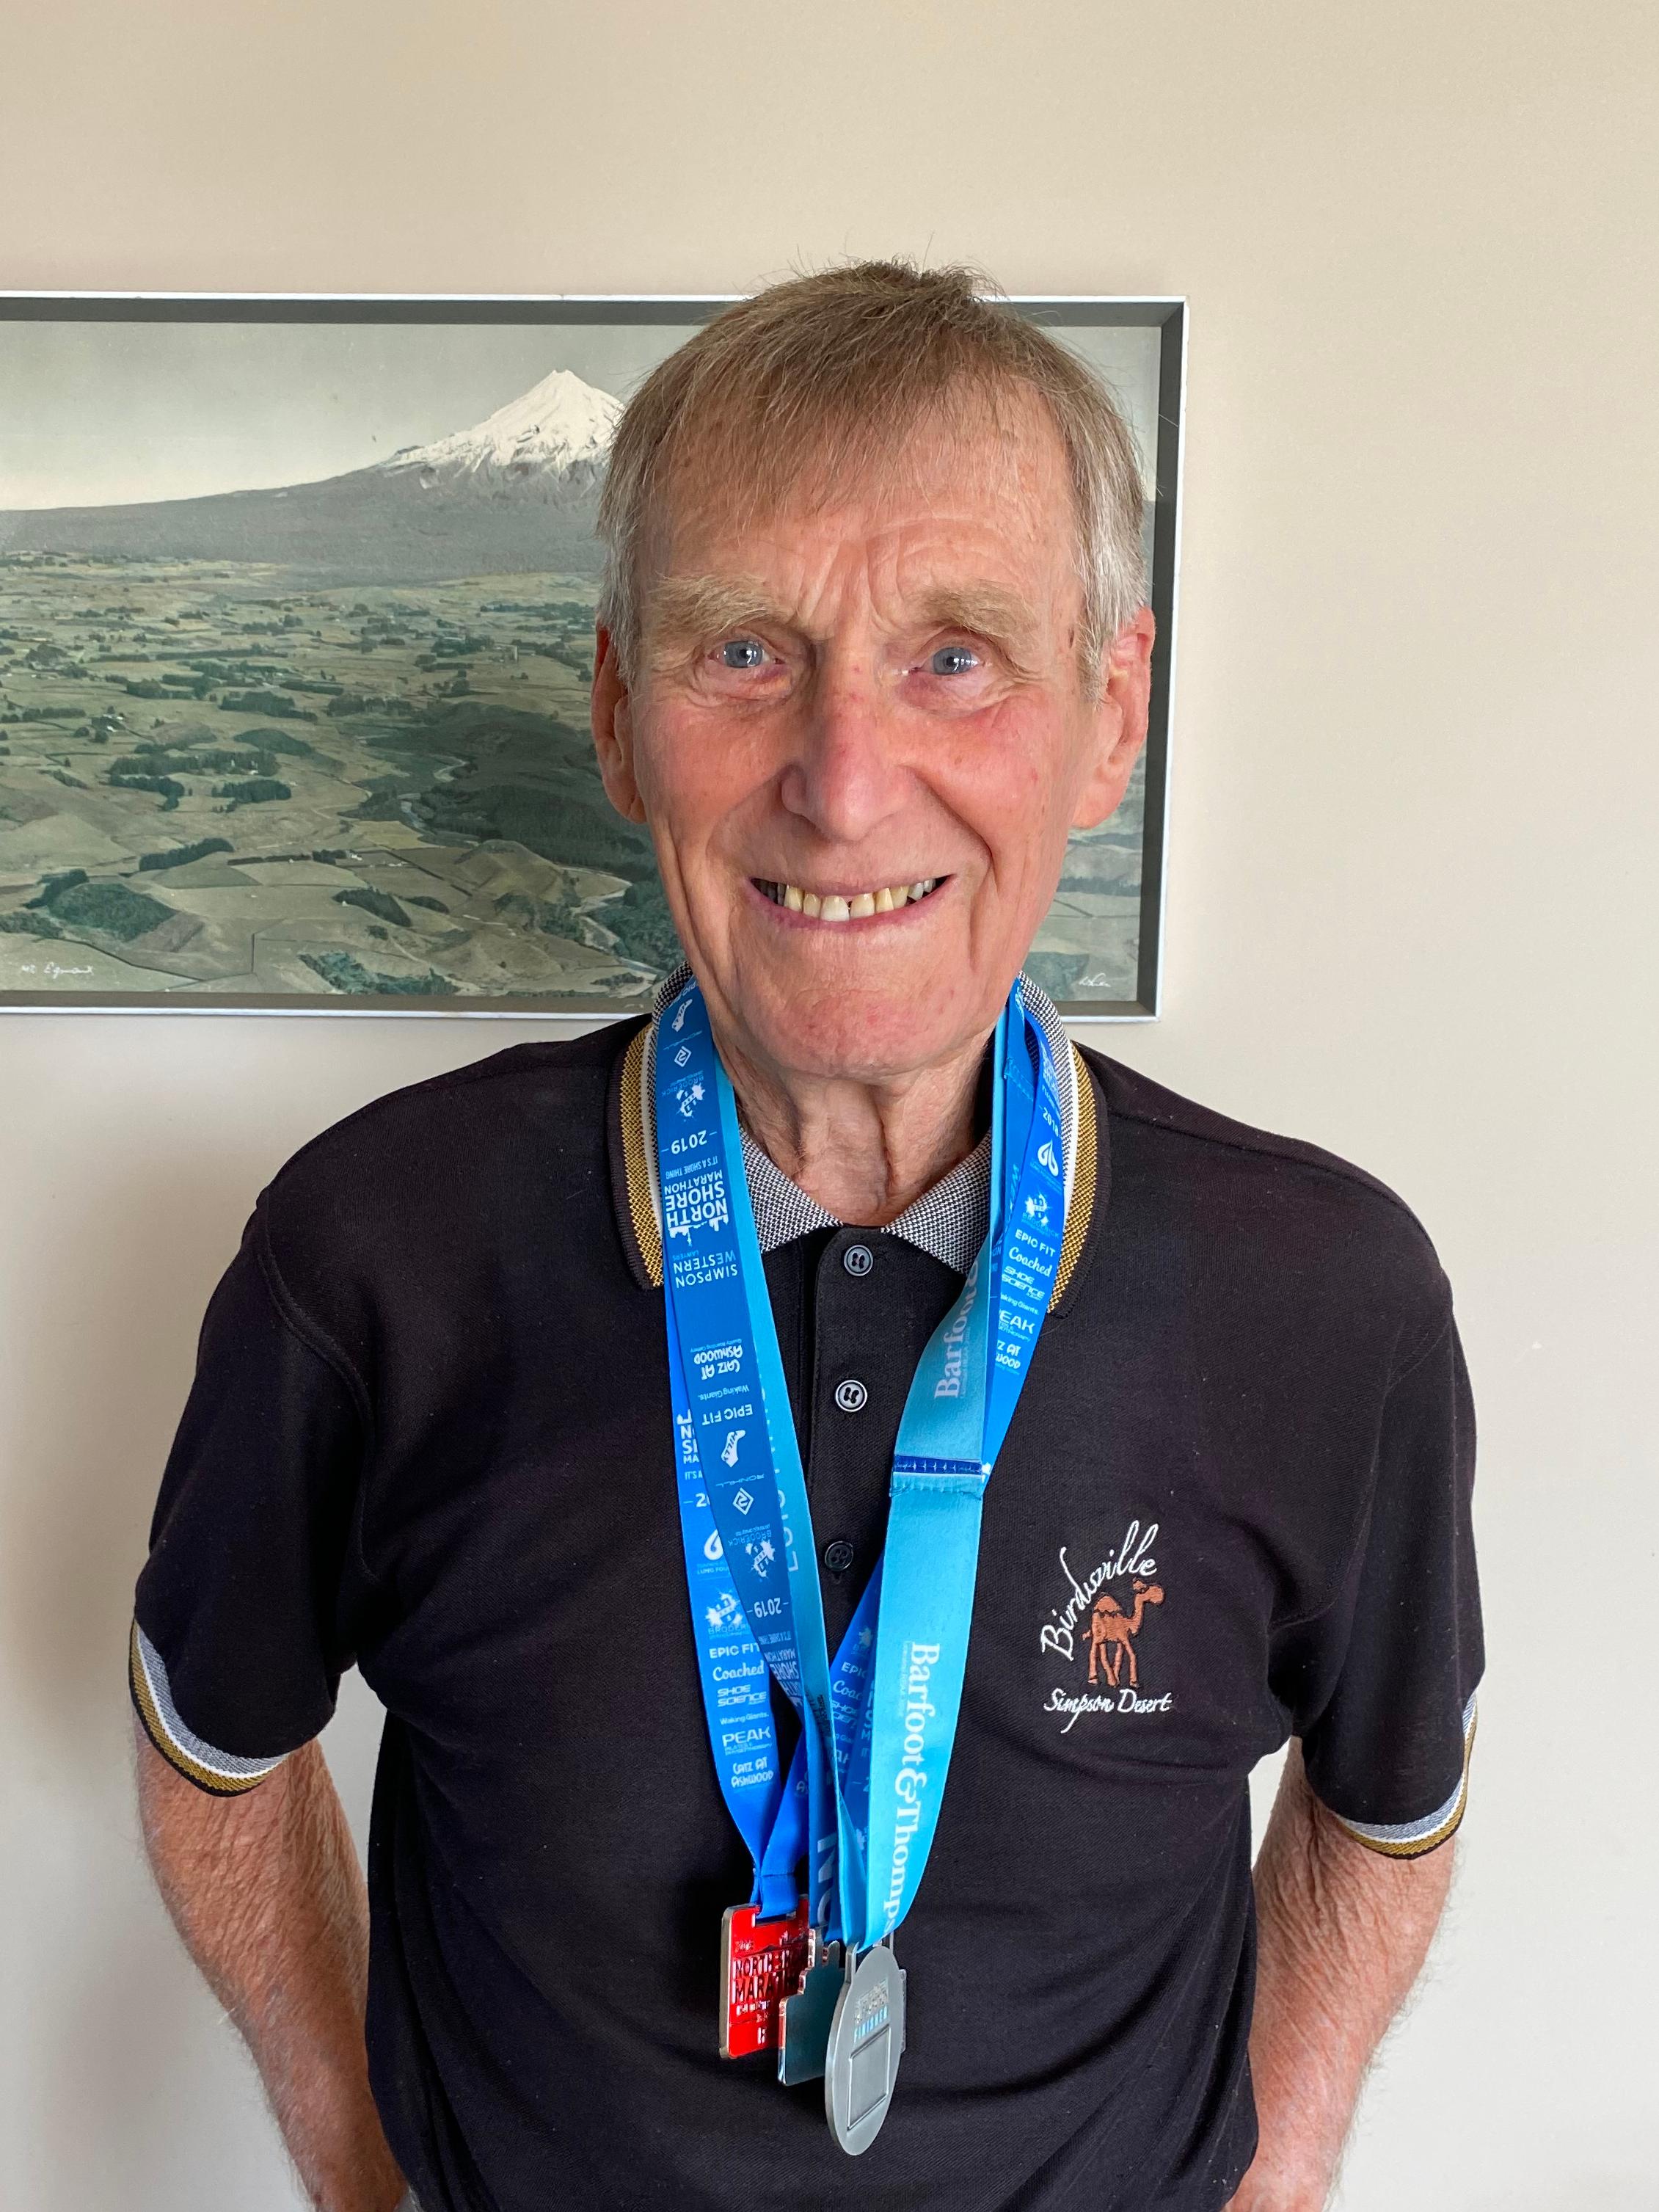 Ray Urbhan with his marathon medals